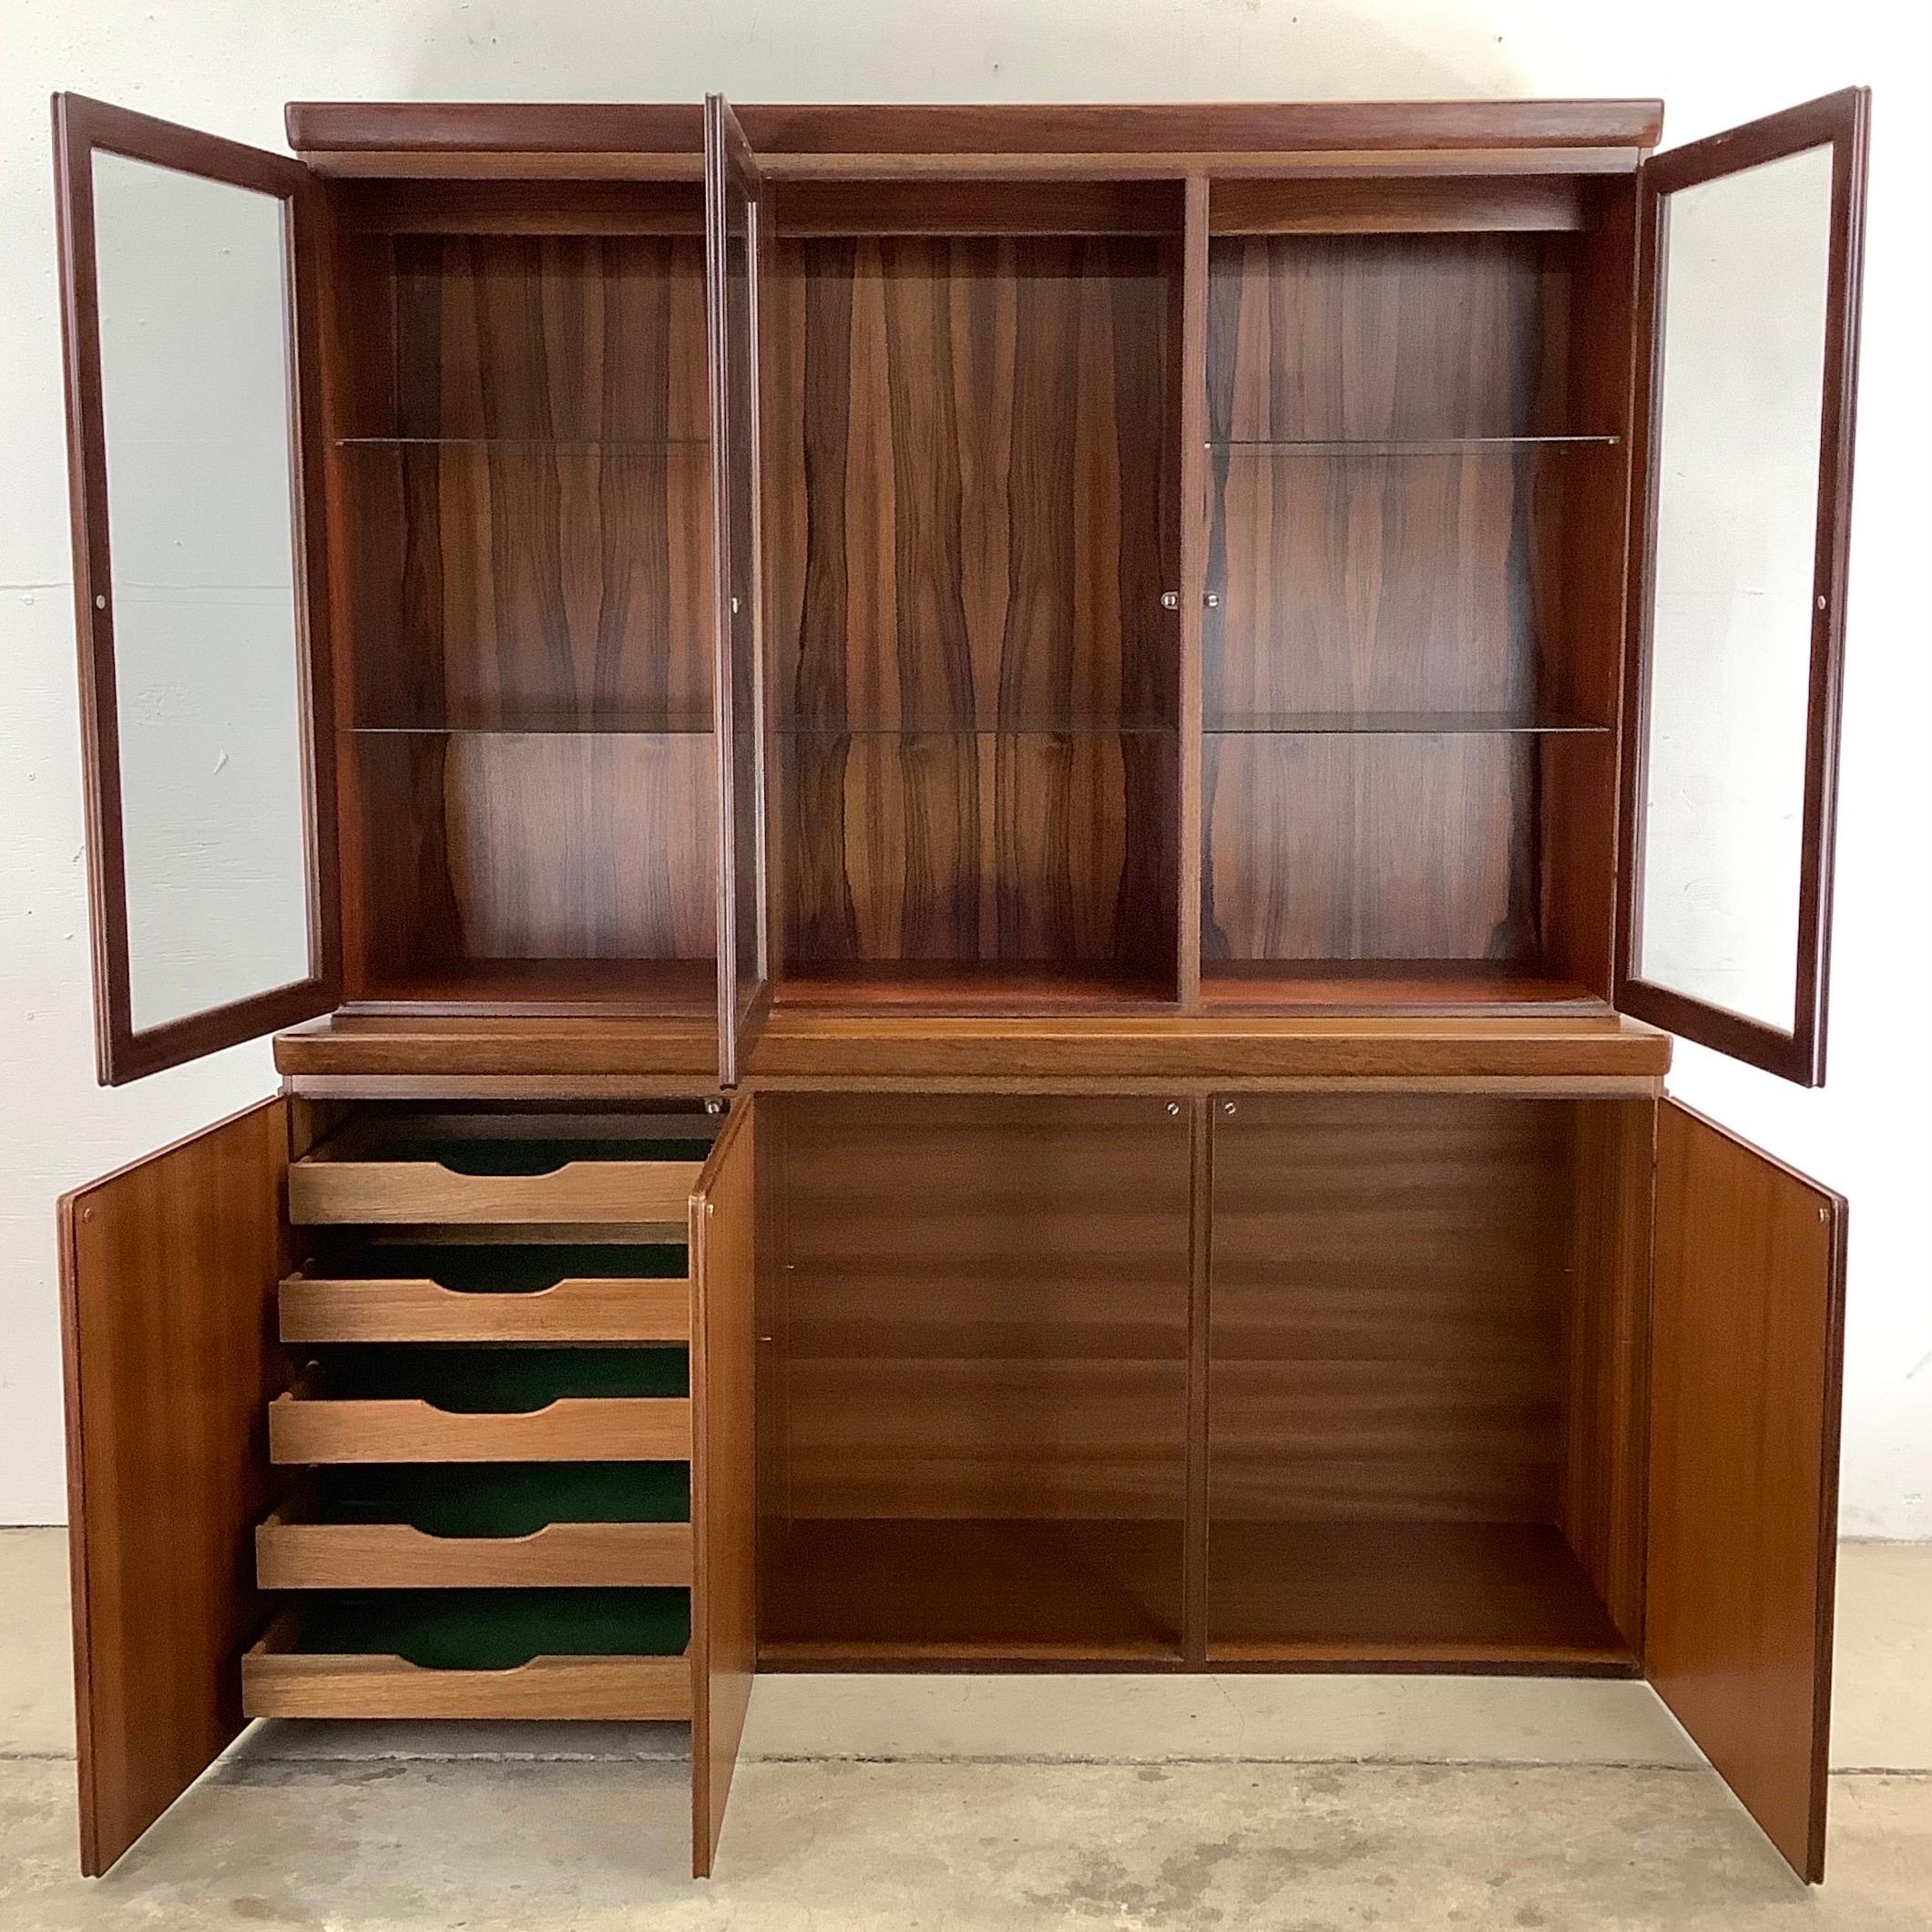 This beautiful Scandinavian modern rosewood sideboard includes a spacious lower cabinet with unique china cabinet topper. The versatile mix of interior cabinet storage, service drawers, and top- lit- shelved display case make this a stunning